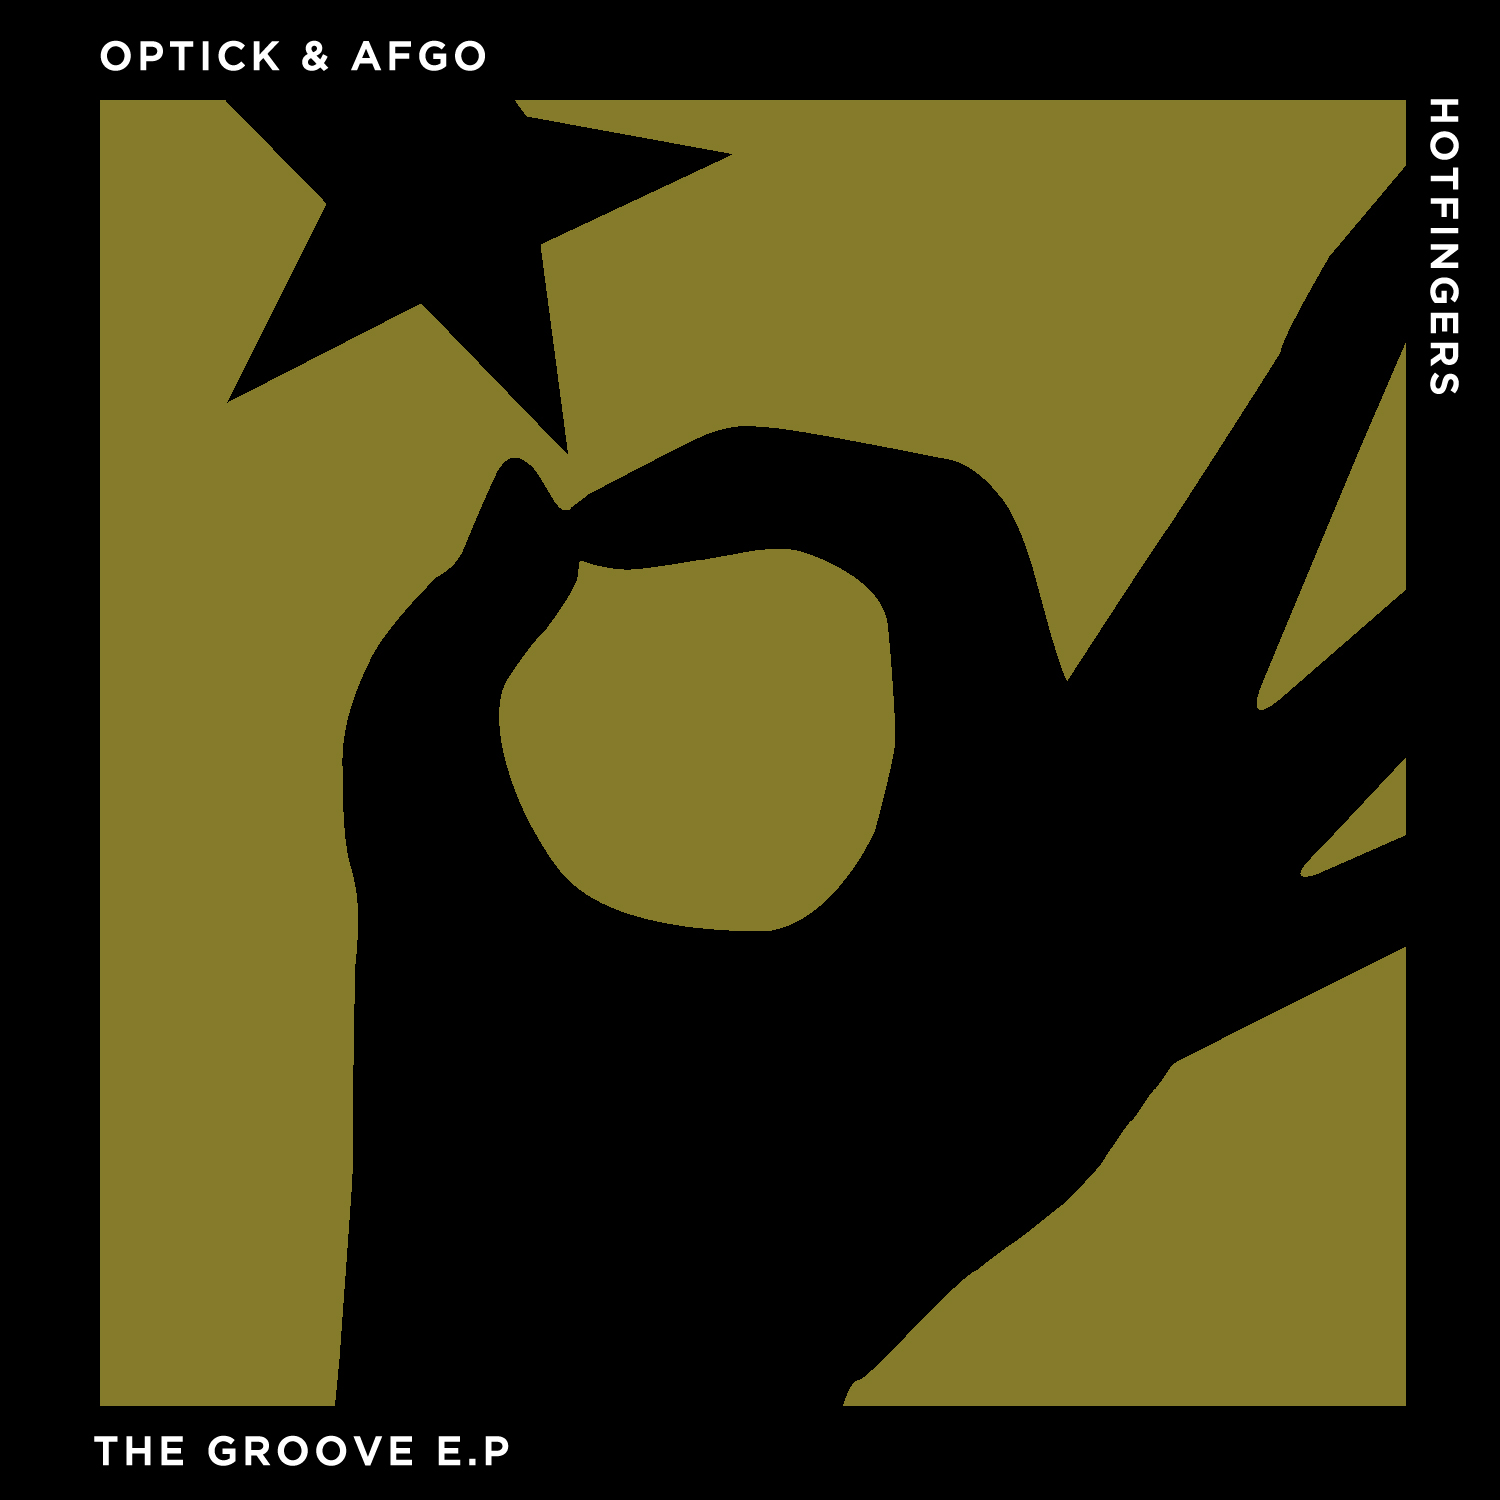 Optick & Afgo release “The Groove” on Hotfingers Records